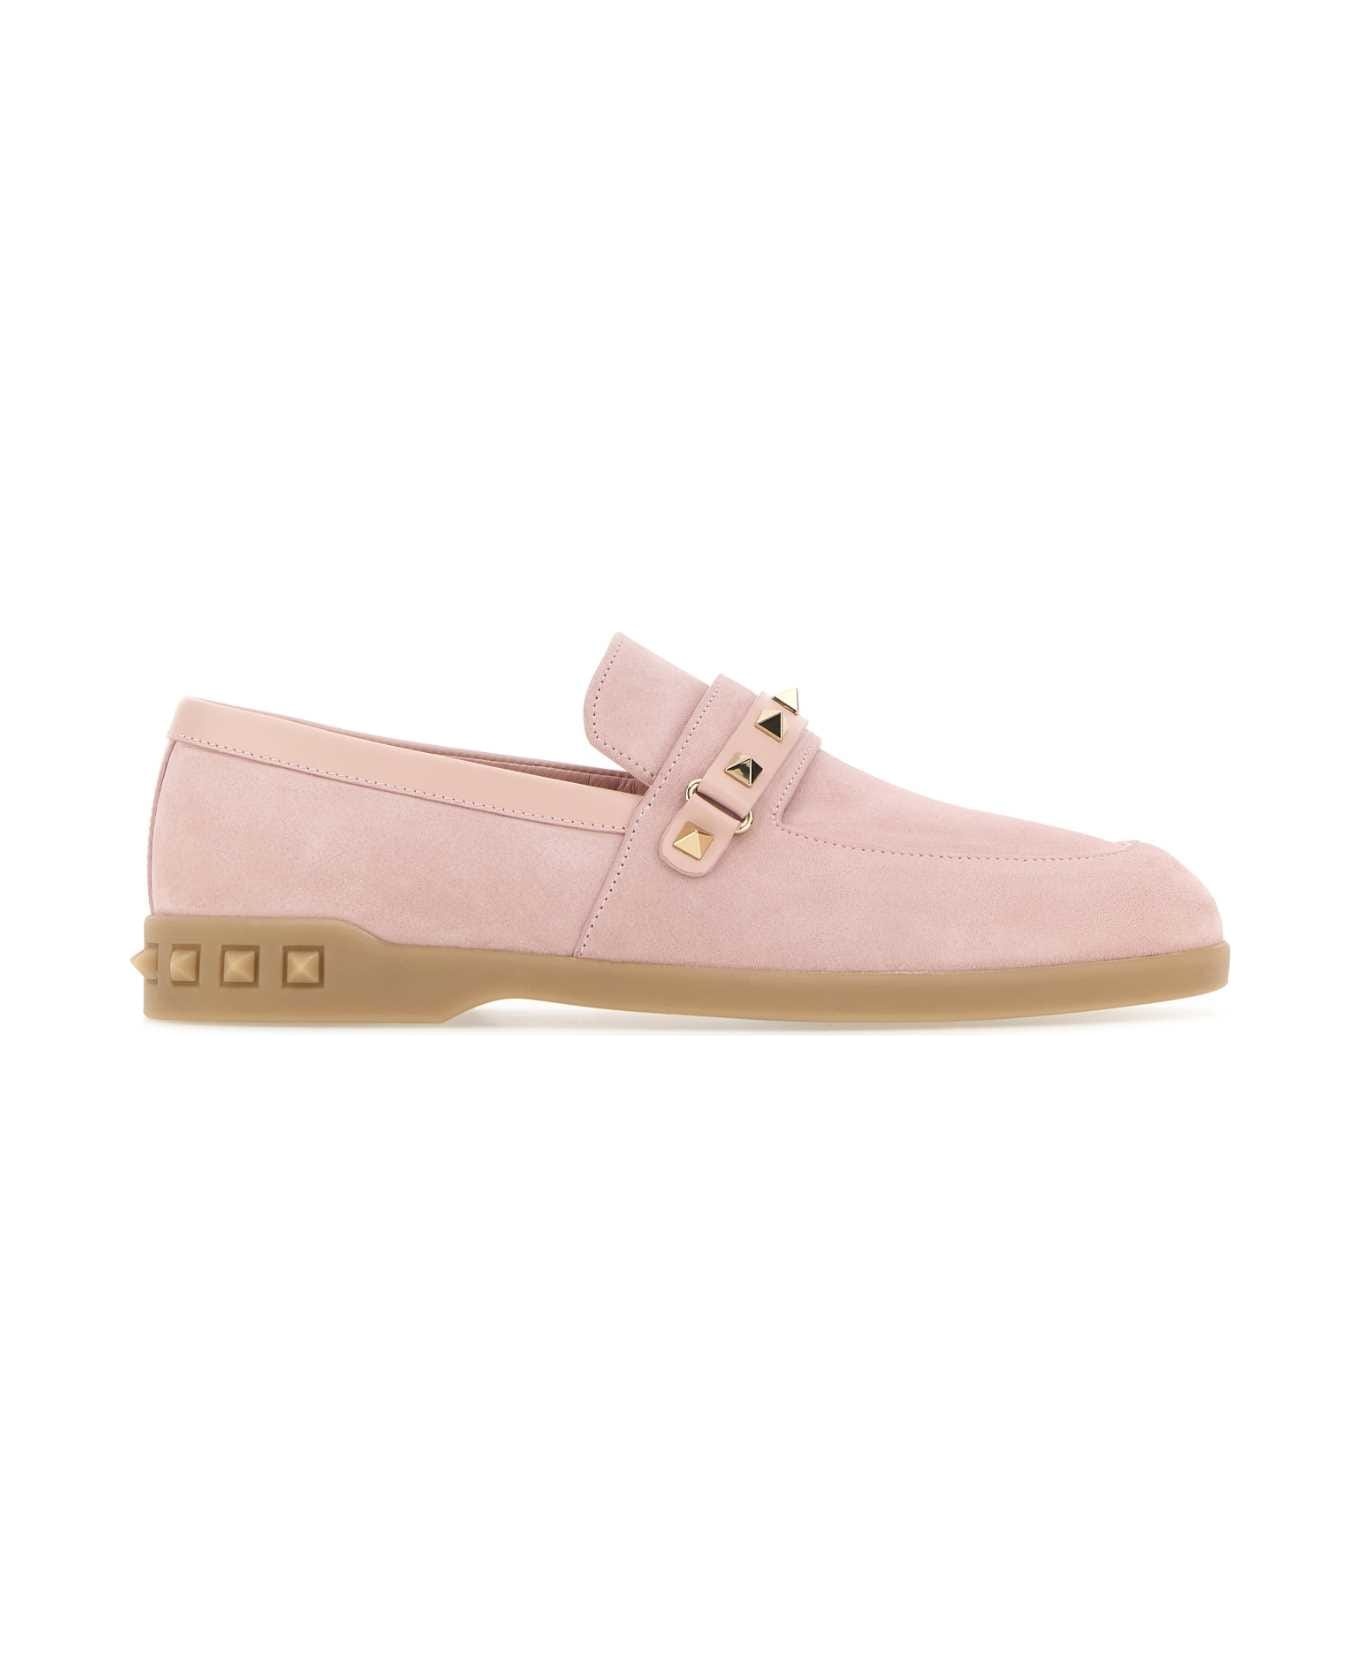 Pastel Pink Suede Leisure Flows Loafers - 1